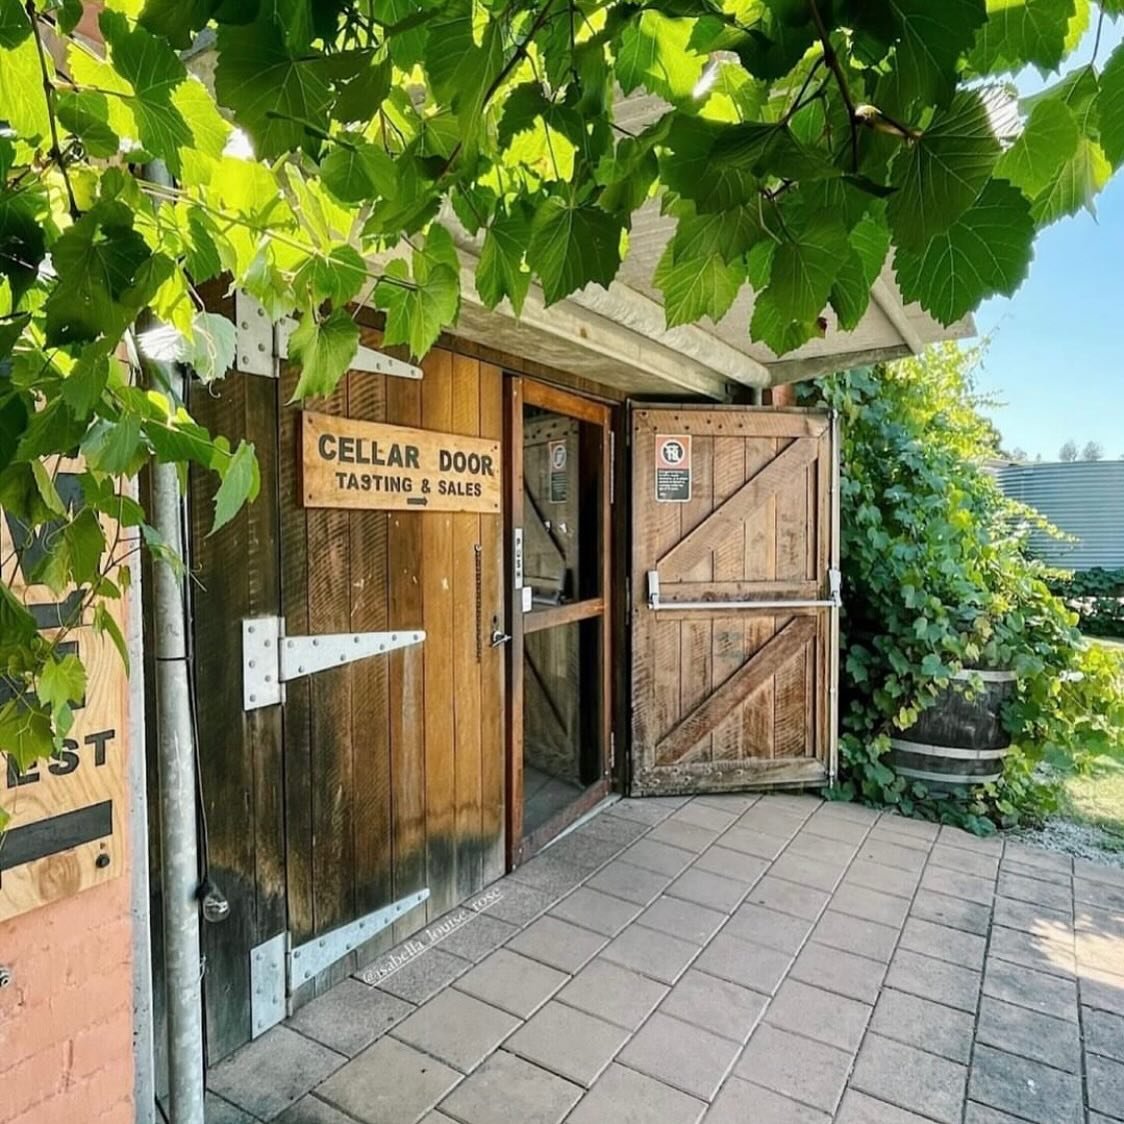 A cellar door isnt far from sight in the Hunter. Check out our new website for all our recommendations. Link in bio. 
.
.

#huntervalley#huntervalleyweddings #huntervalleyaccommodation #pokolbin&nbsp; #huntervalleynsw
#boutiqueaccommodation #interior